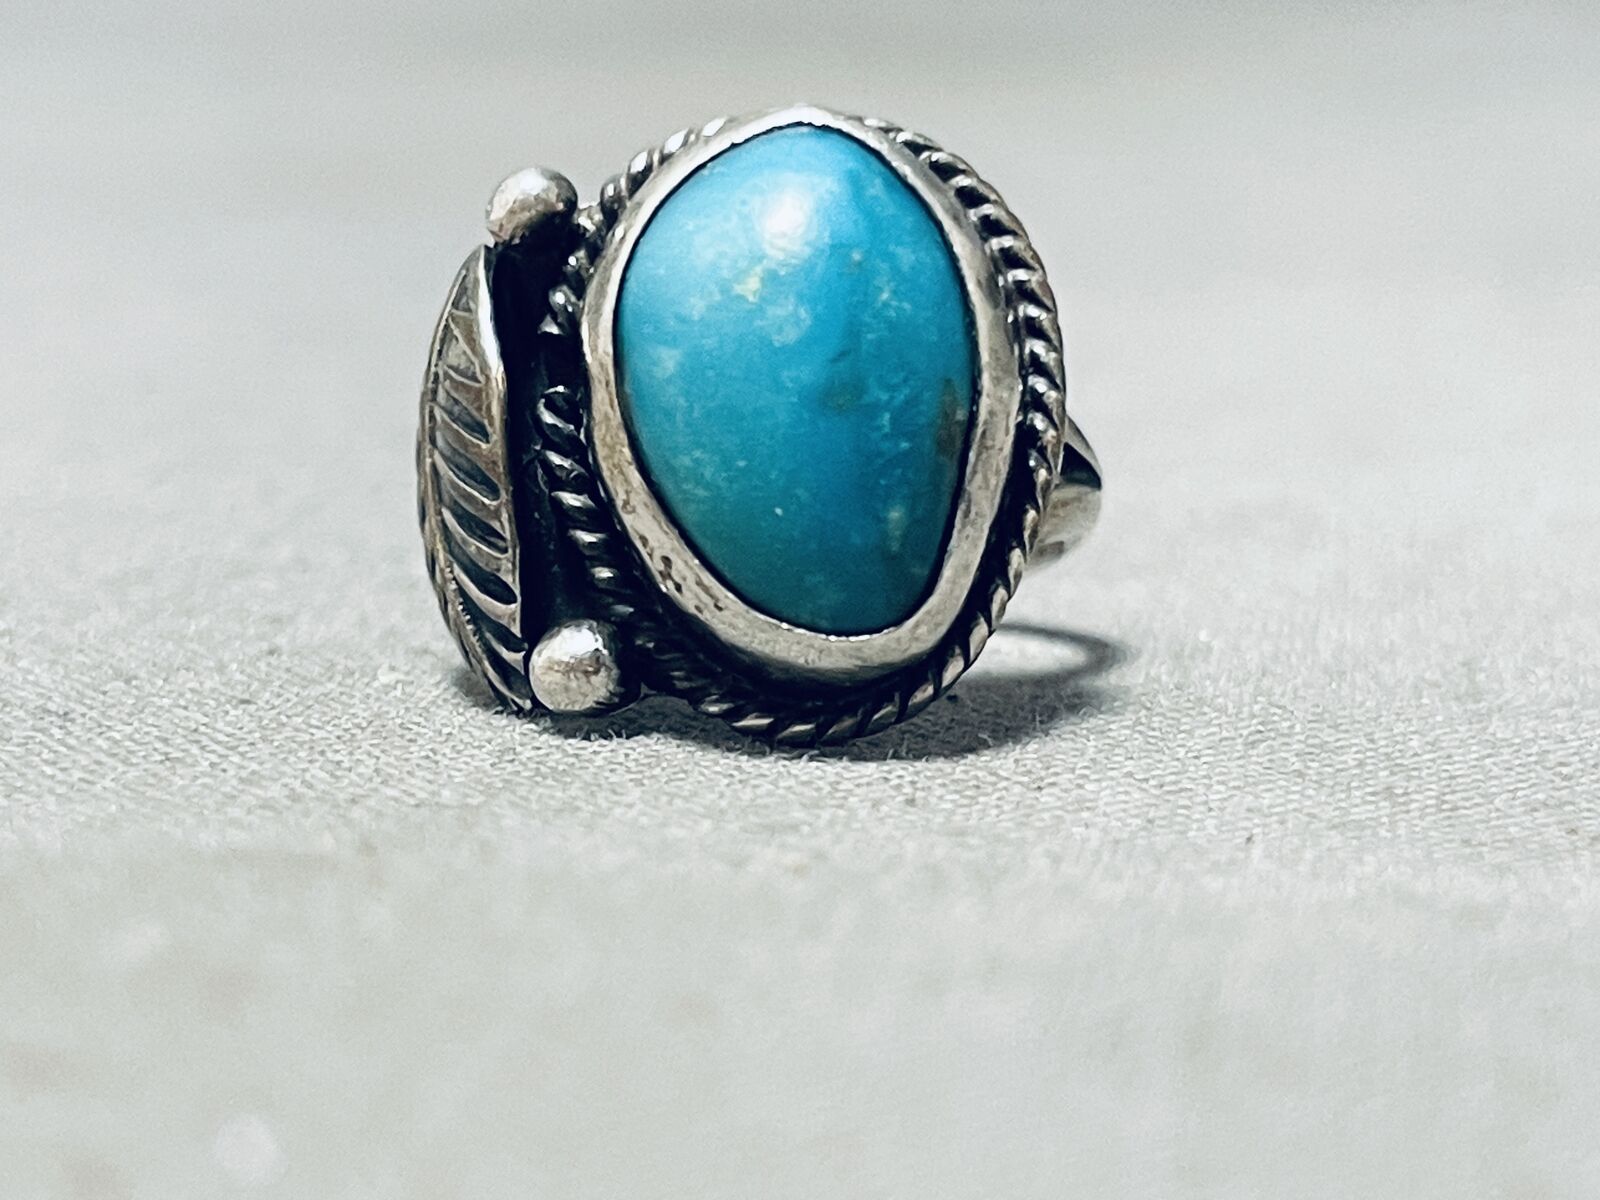 ICONIC VINTAGE NAVAJO BLUE GEM TURQUOISE STERLING SILVER RING